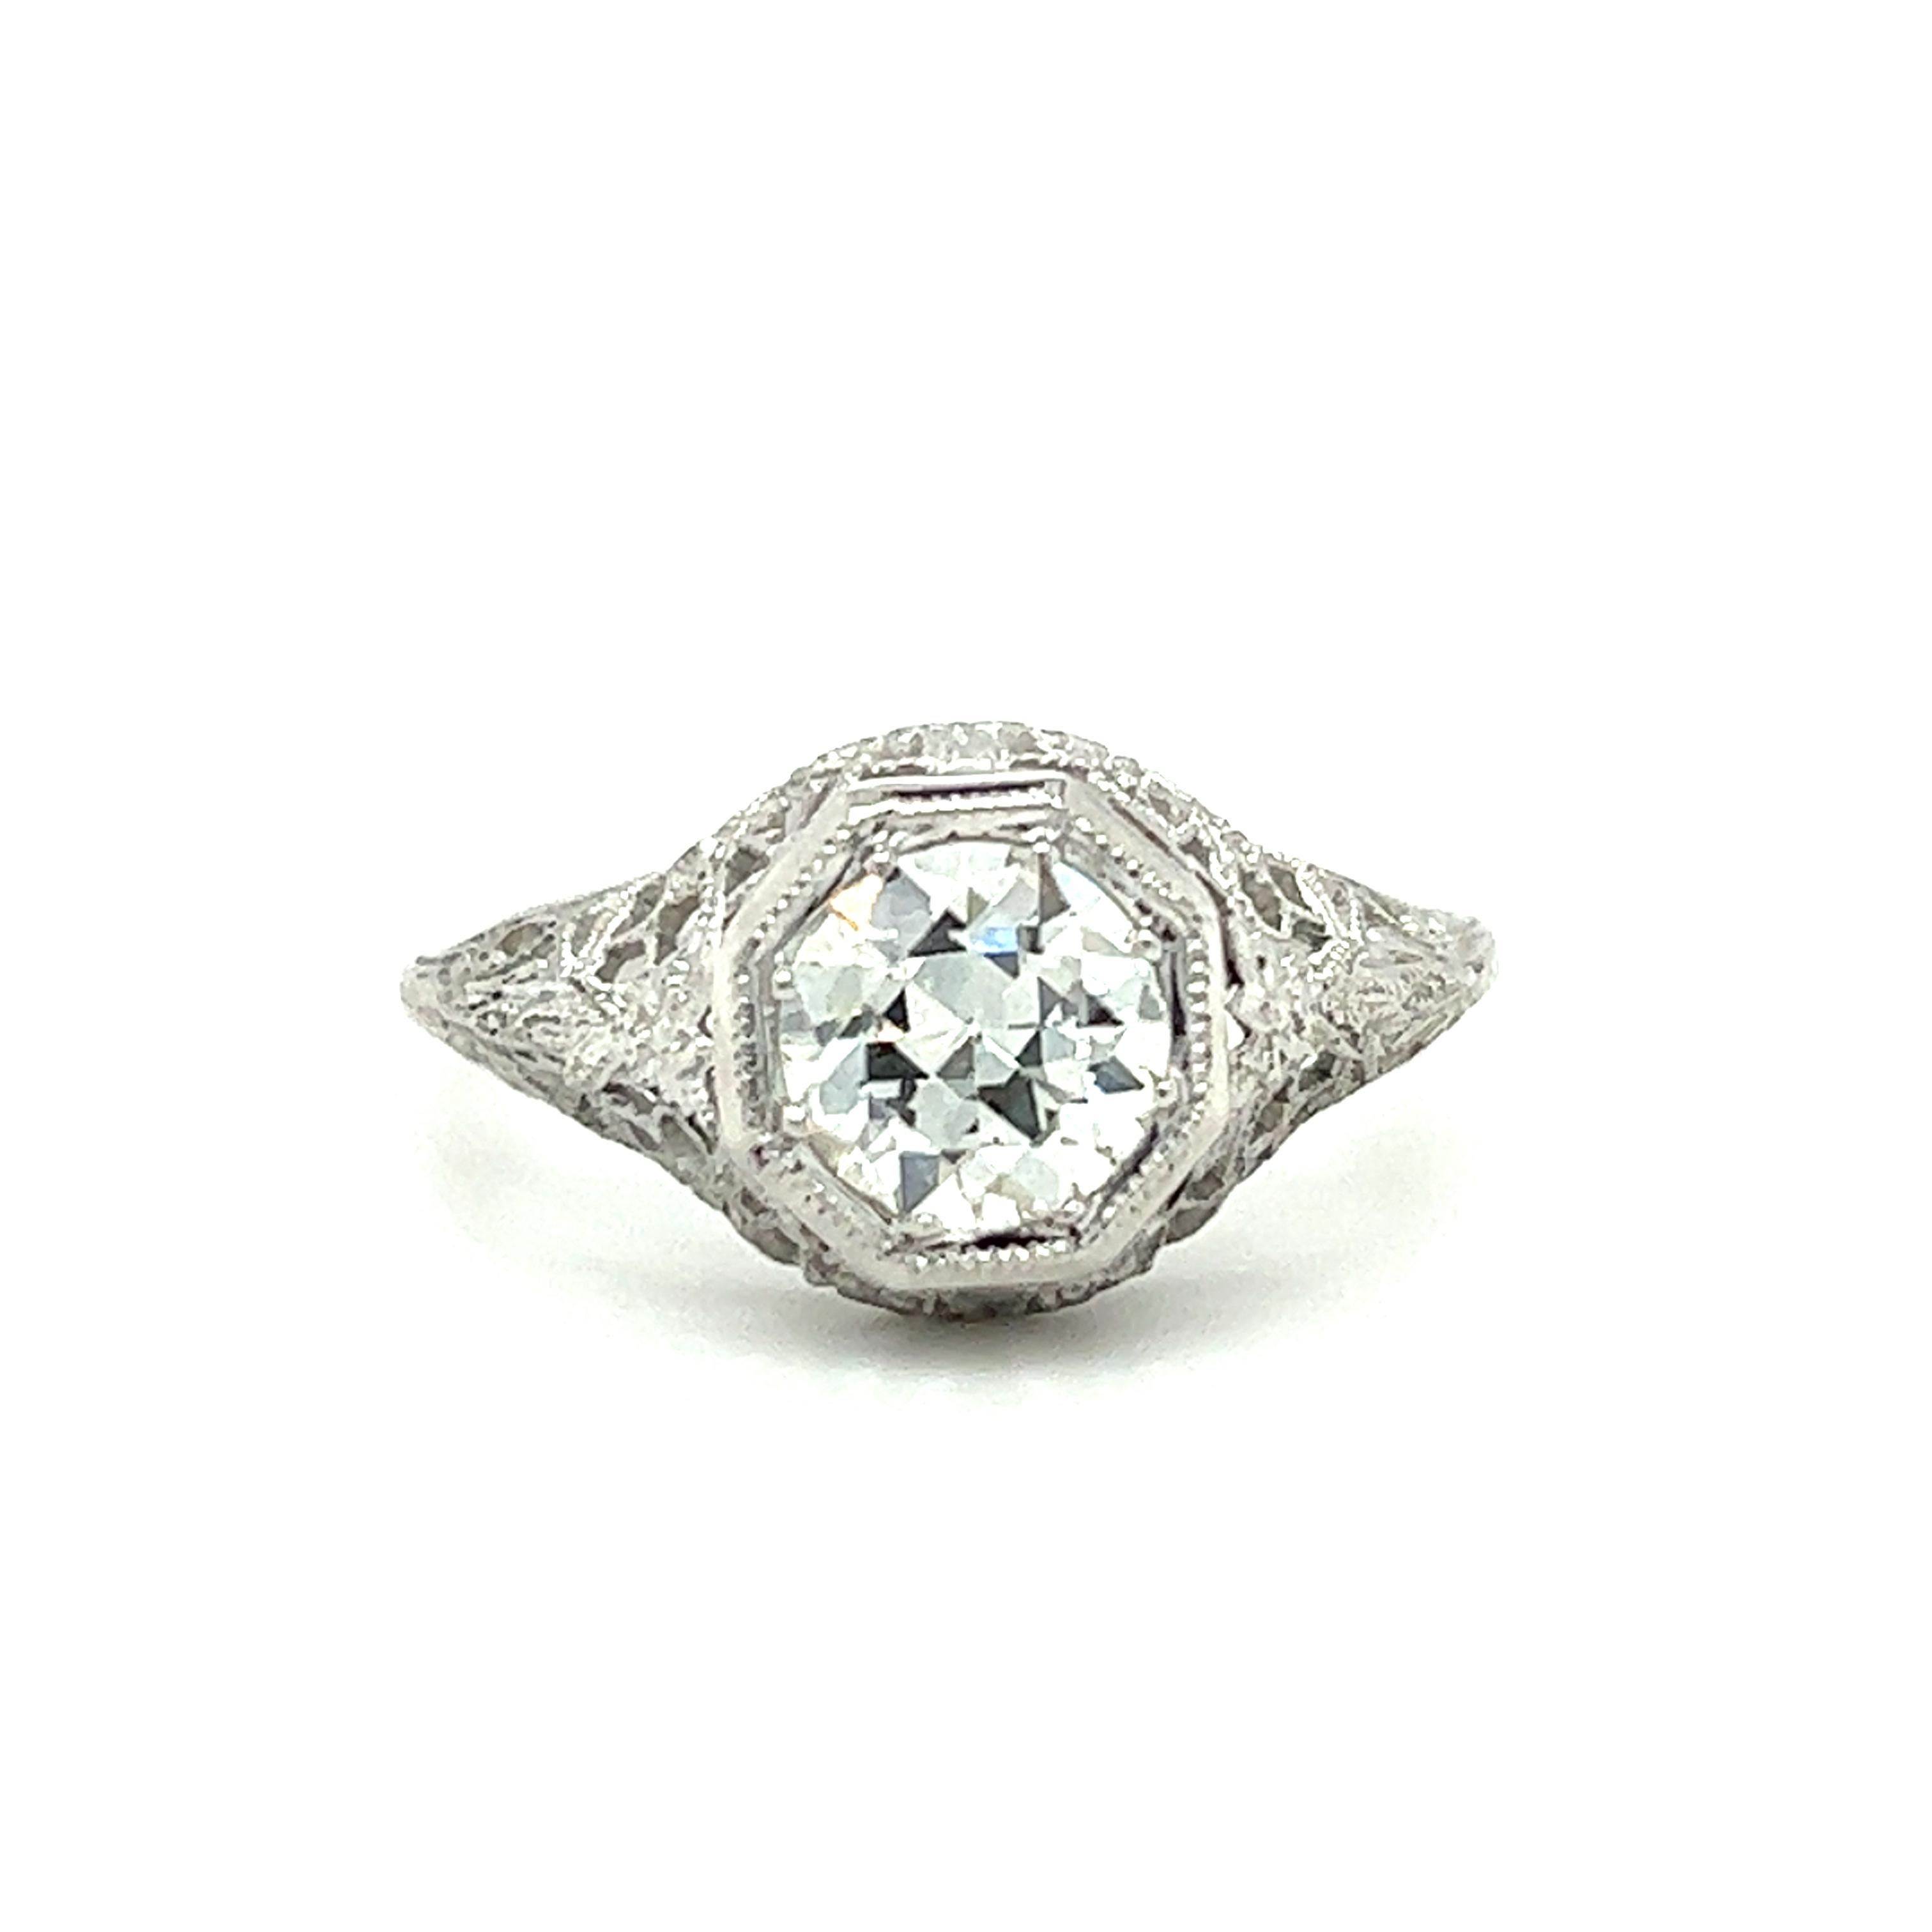 This is an amazing opportunity to own an original 1920s Art Deco filigree ring that was never set or worn.  This setting was acquired from a jeweler who owned it for 100 years and stored it safely.  Our Master craftsman has set this 18-karat white